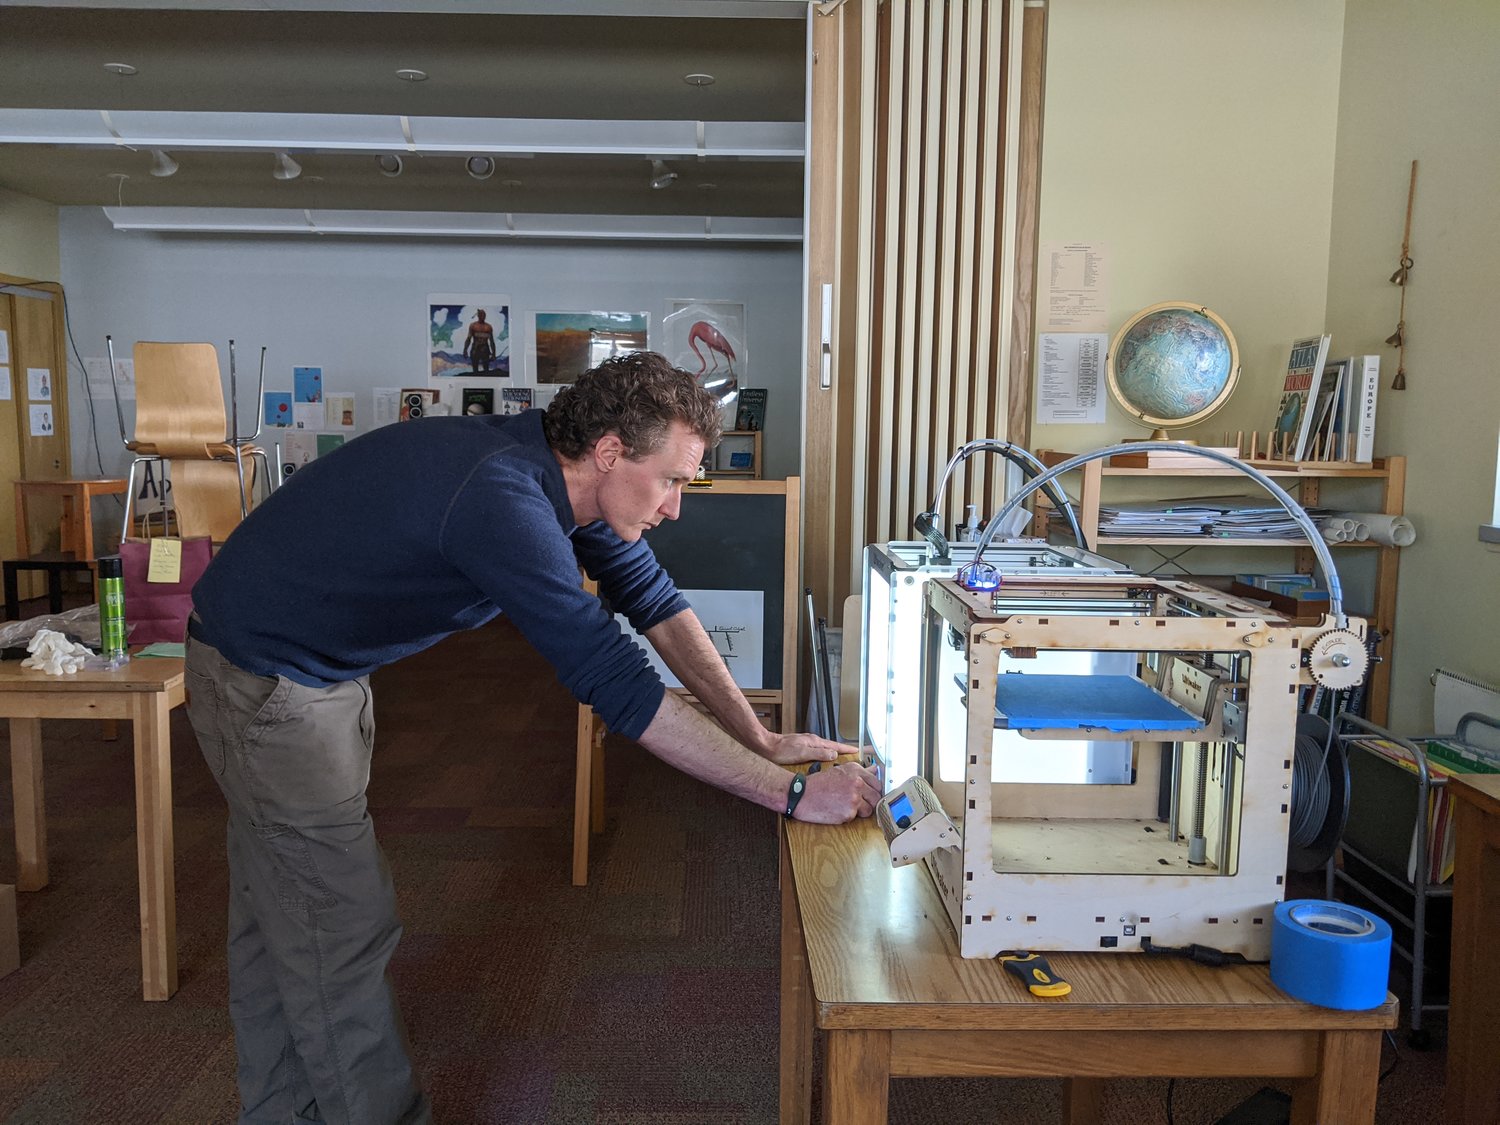 Homestead School Assistant Headmaster Jack Comstock checks the 3D printer that is being used to produce face masks and protective shields.